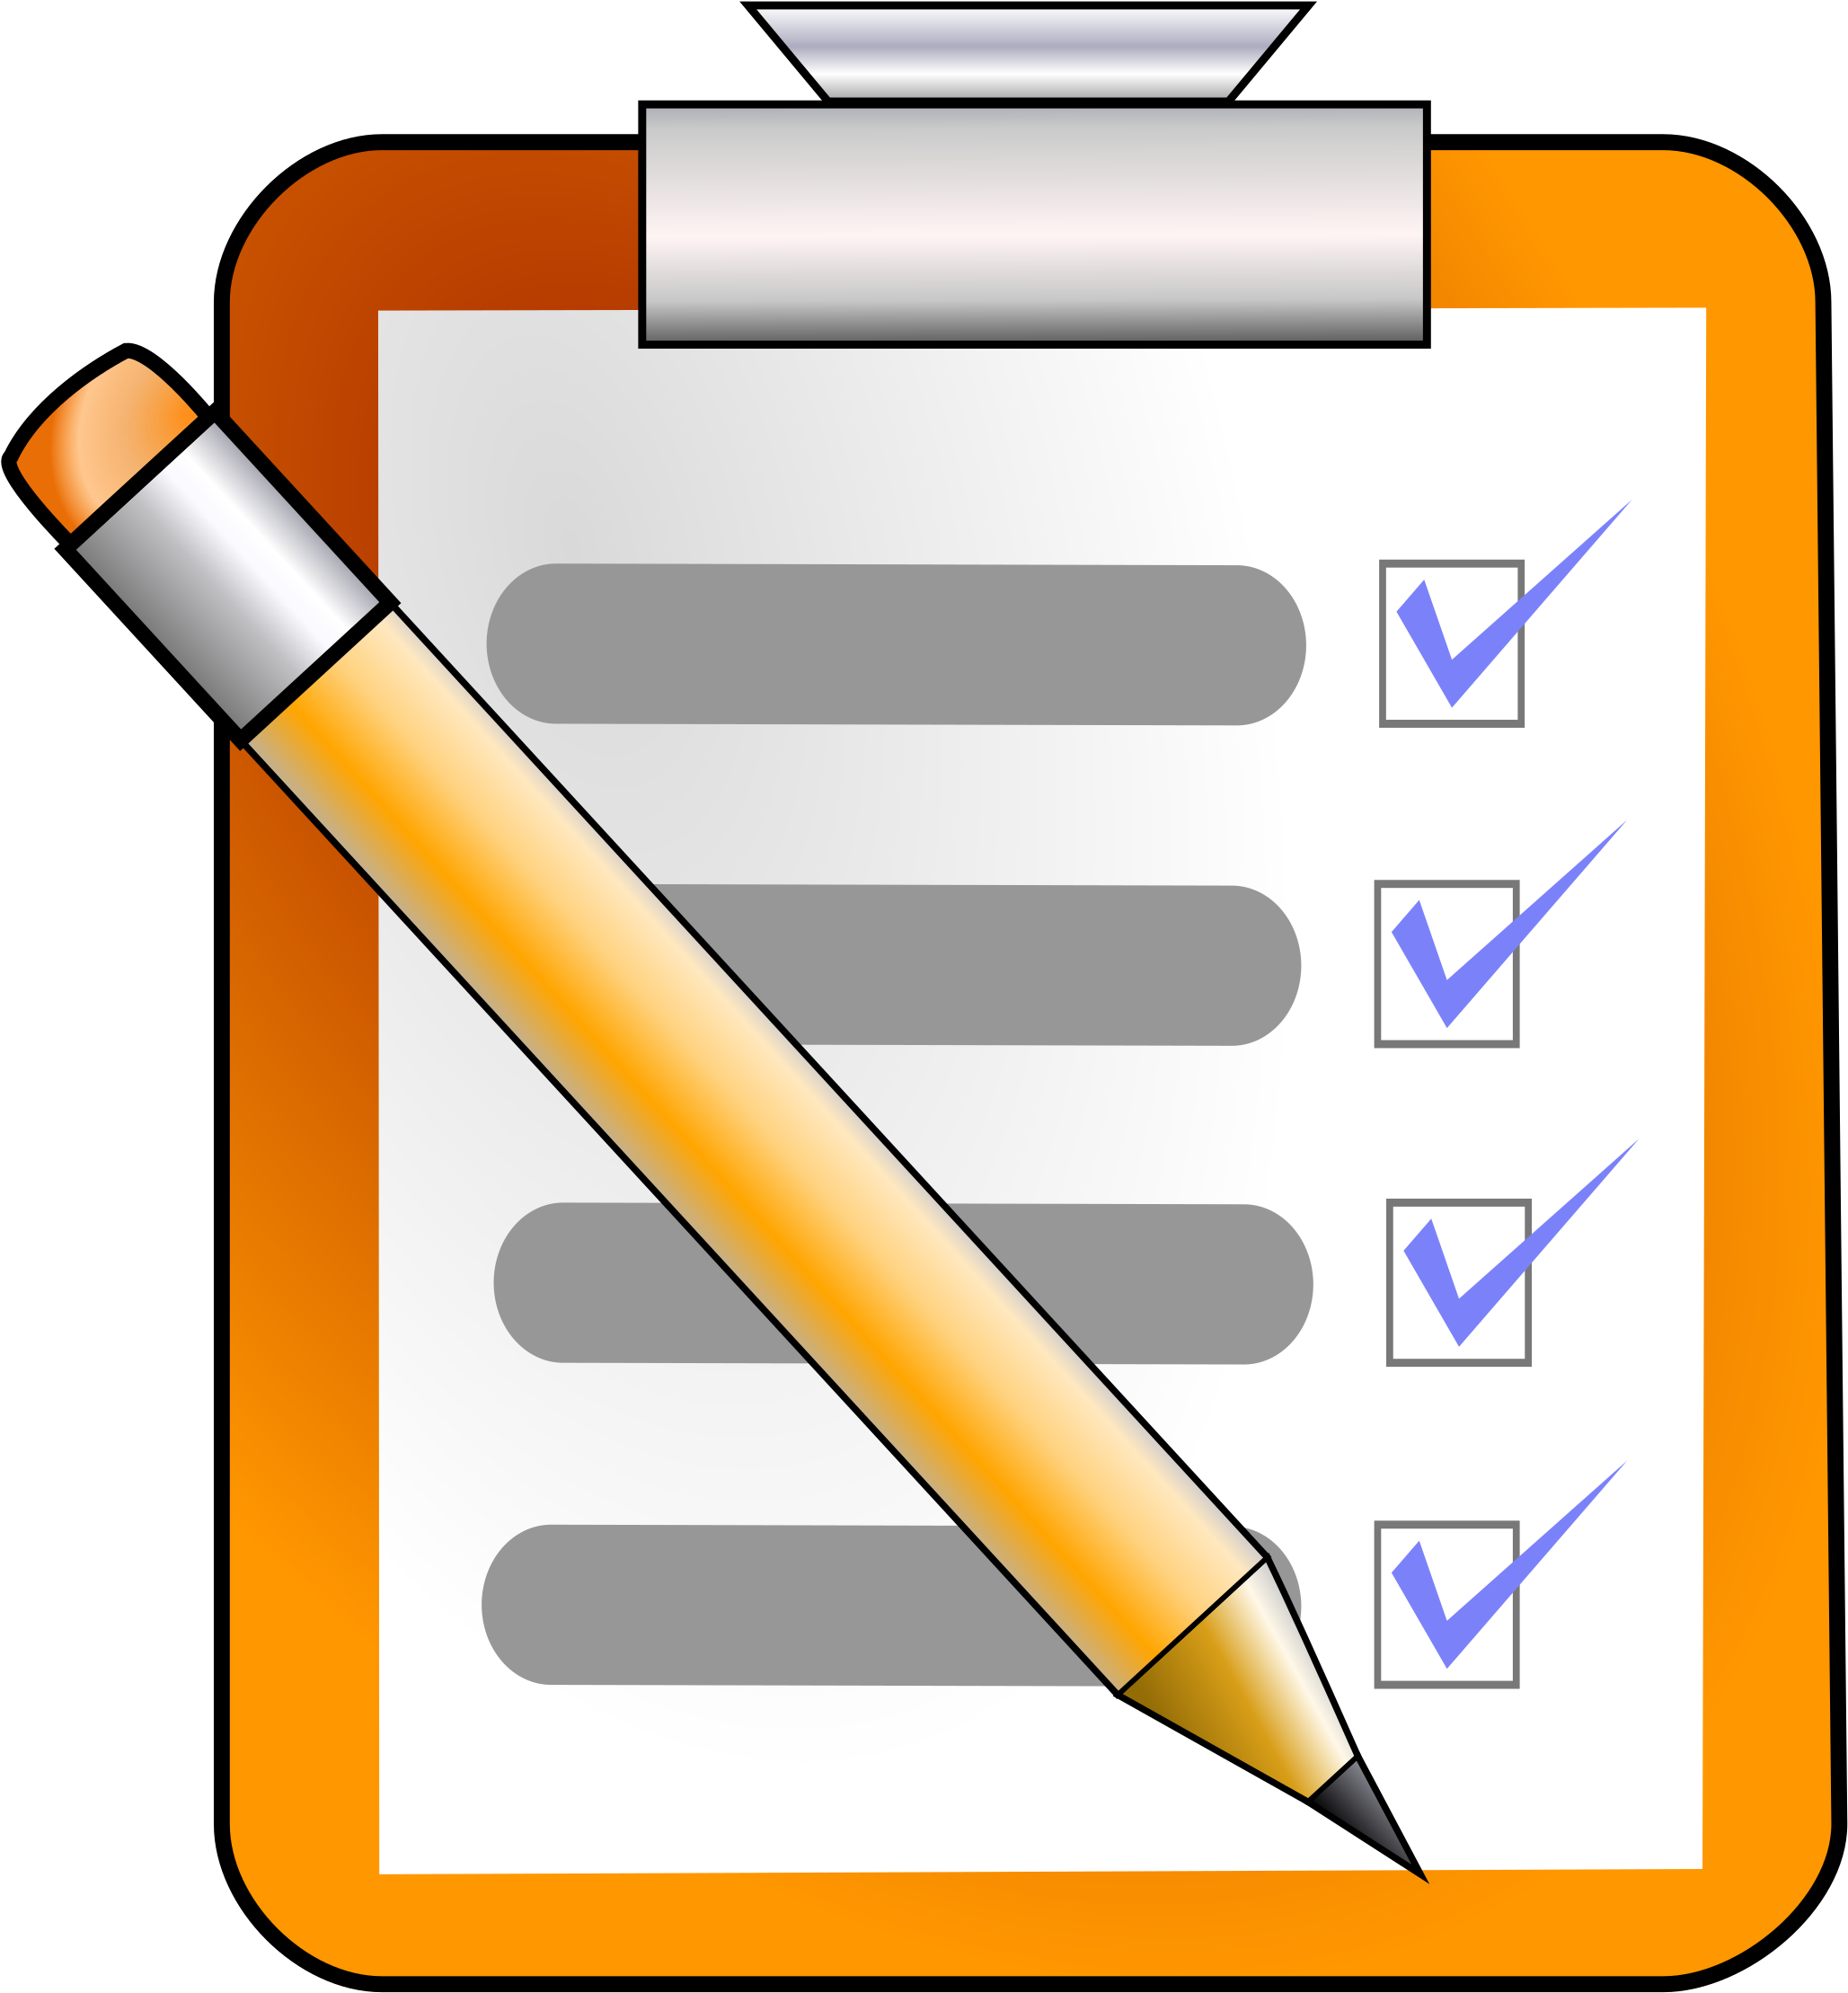 Check Clipart Task - Checklist Clipart Png - (2400x2400) Png Clipart Downlo...